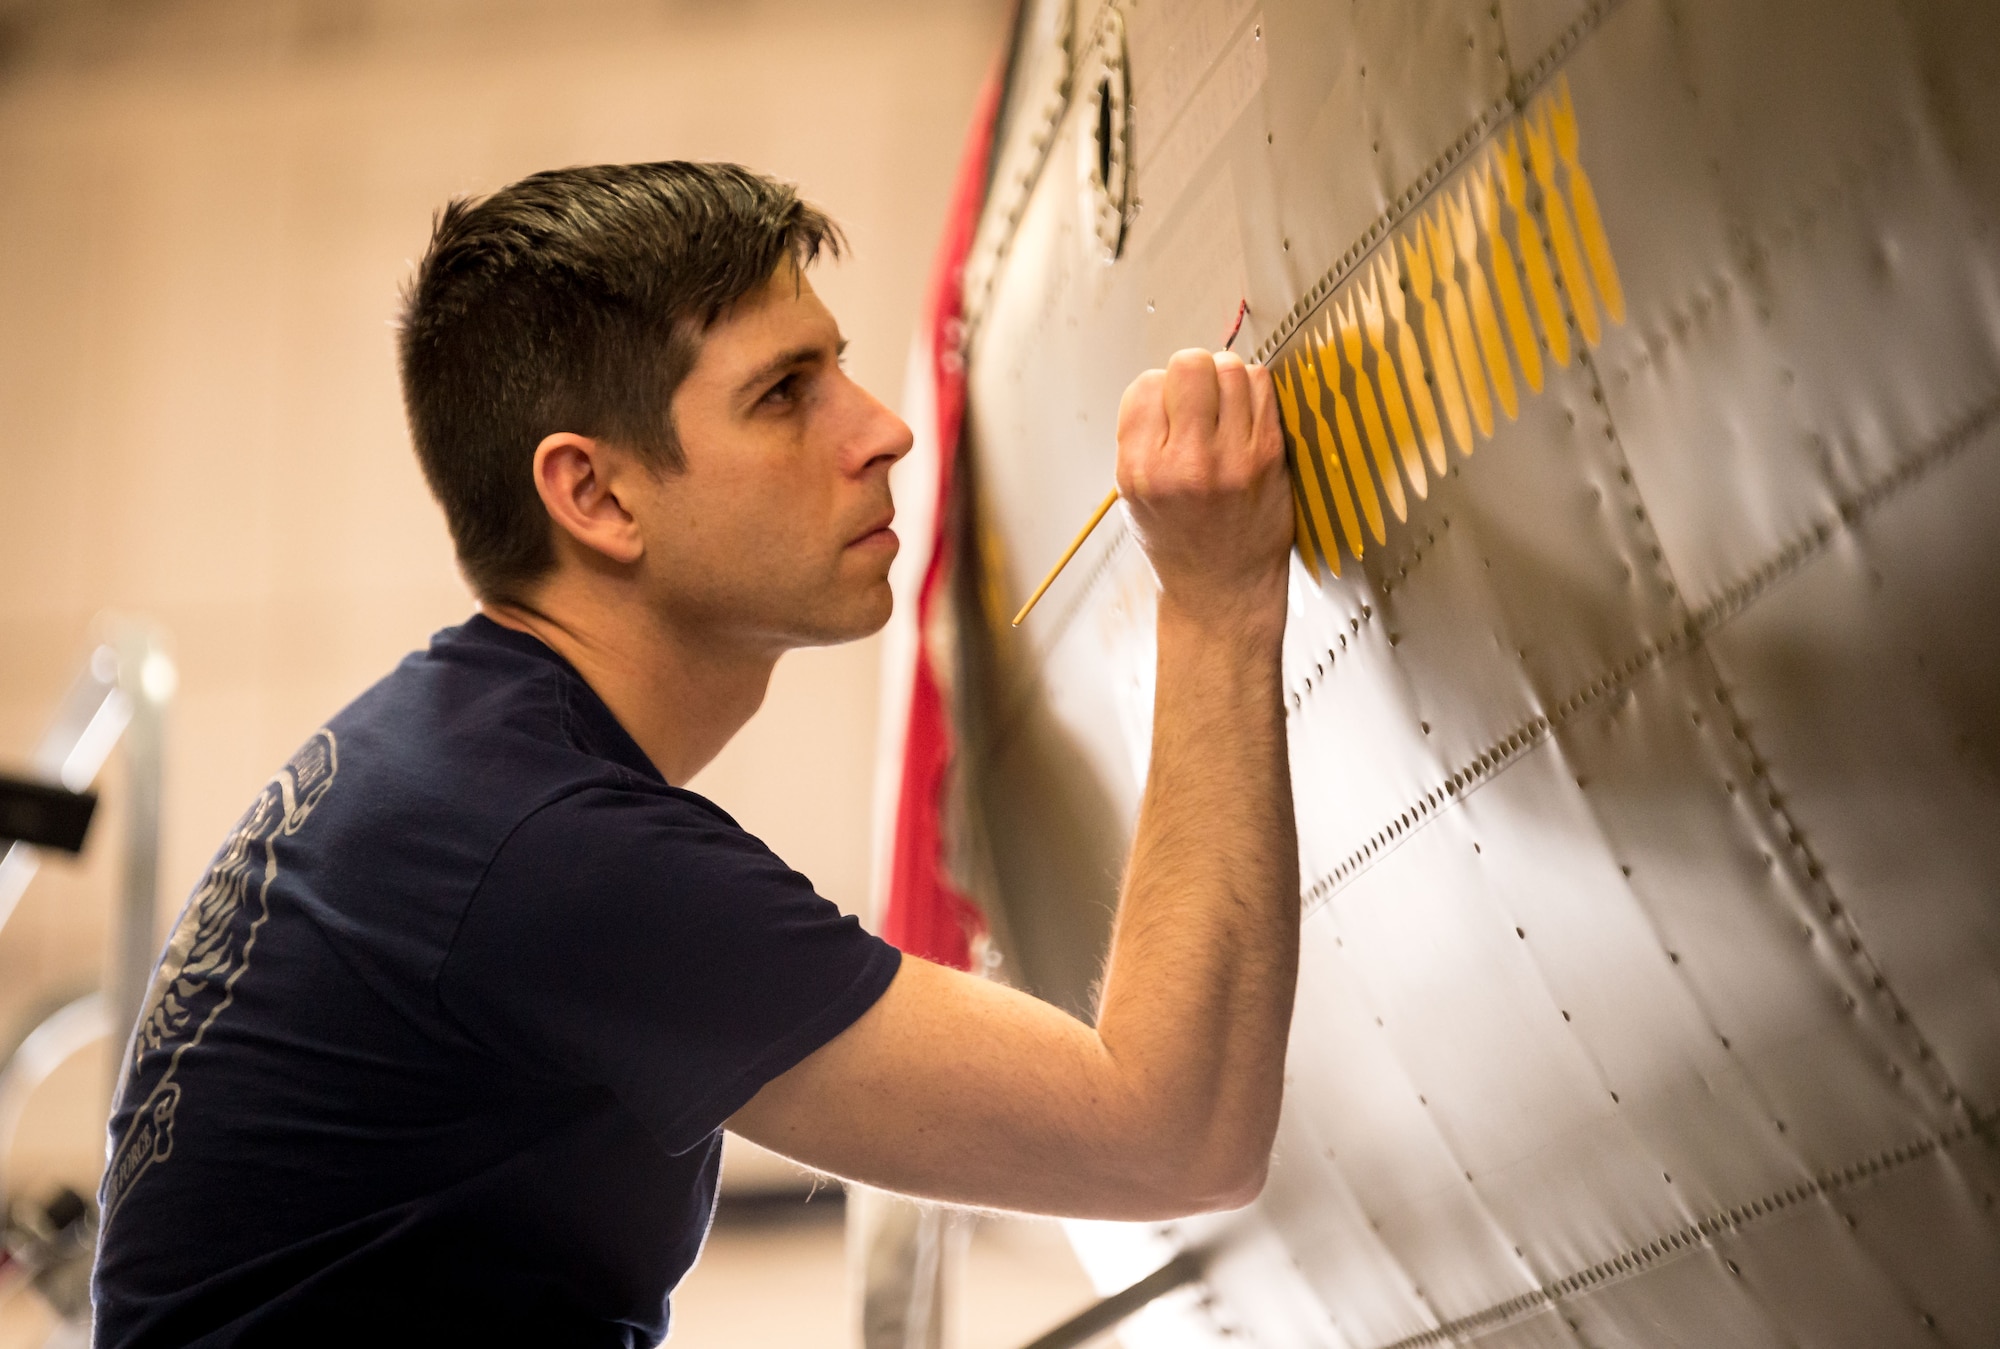 Museum restoration specialist Casey Simmons paints yellow silhouettes of bombs representing completed missions on the fuselage of the Boeing B-17F "Memphis Belle" during the restoration of the historic aircraft at Wright-Patterson Air Force Base, Ohio, Feb. 1, 2018. (U.S. Air Force photo by J.M. Eddins Jr.)